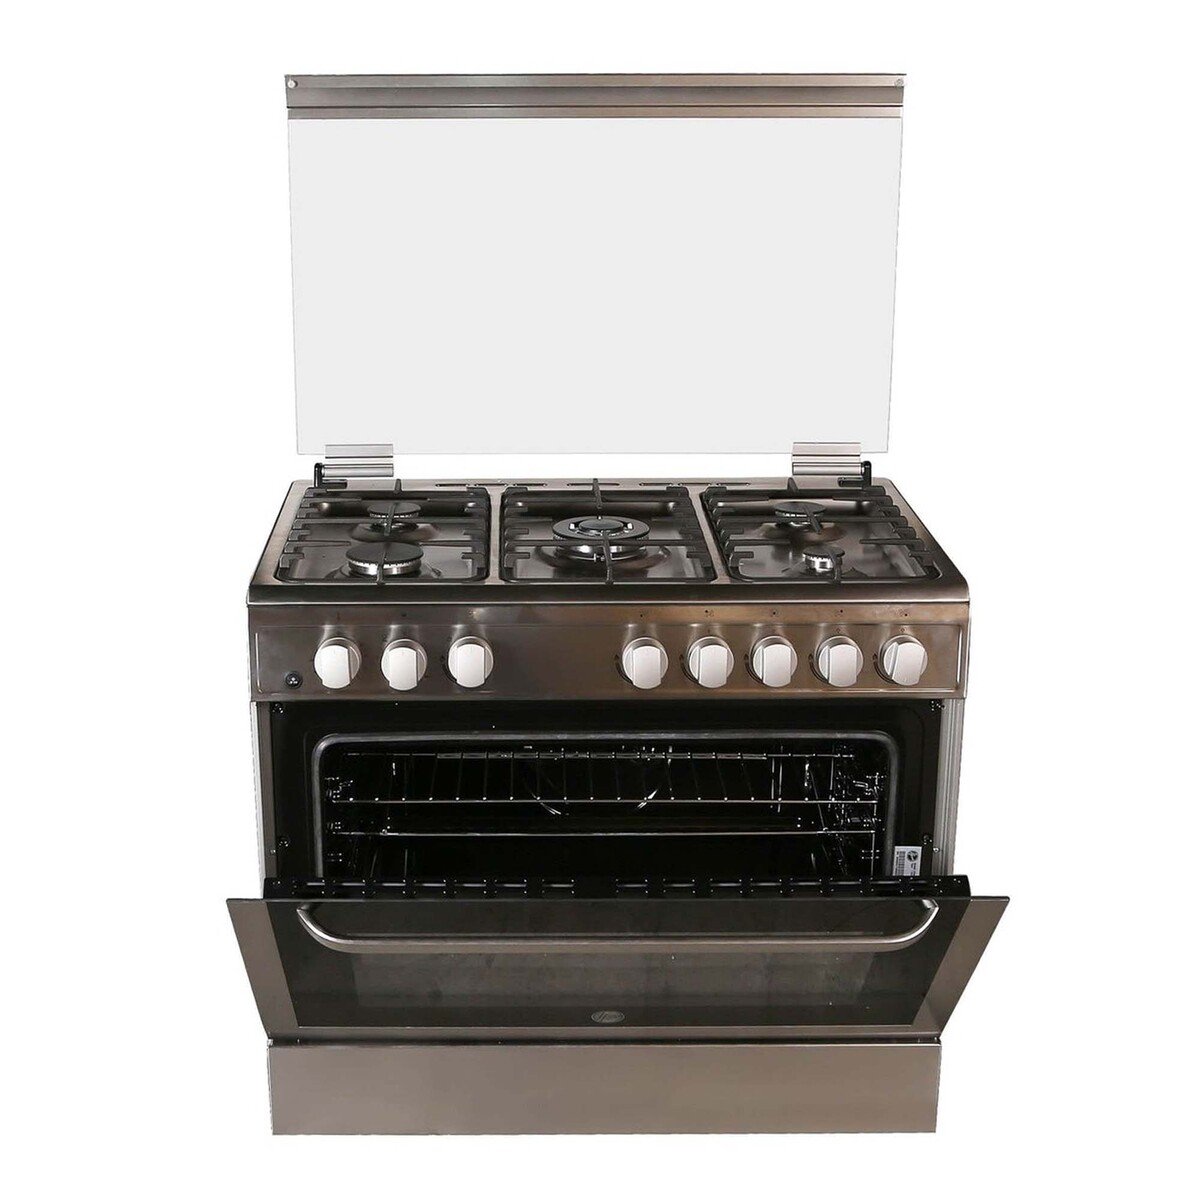 Hoover Gas Cooking Range FGC9060-3DE 90x60cm With Electric Oven 5 Gas Burner Made In Turkey